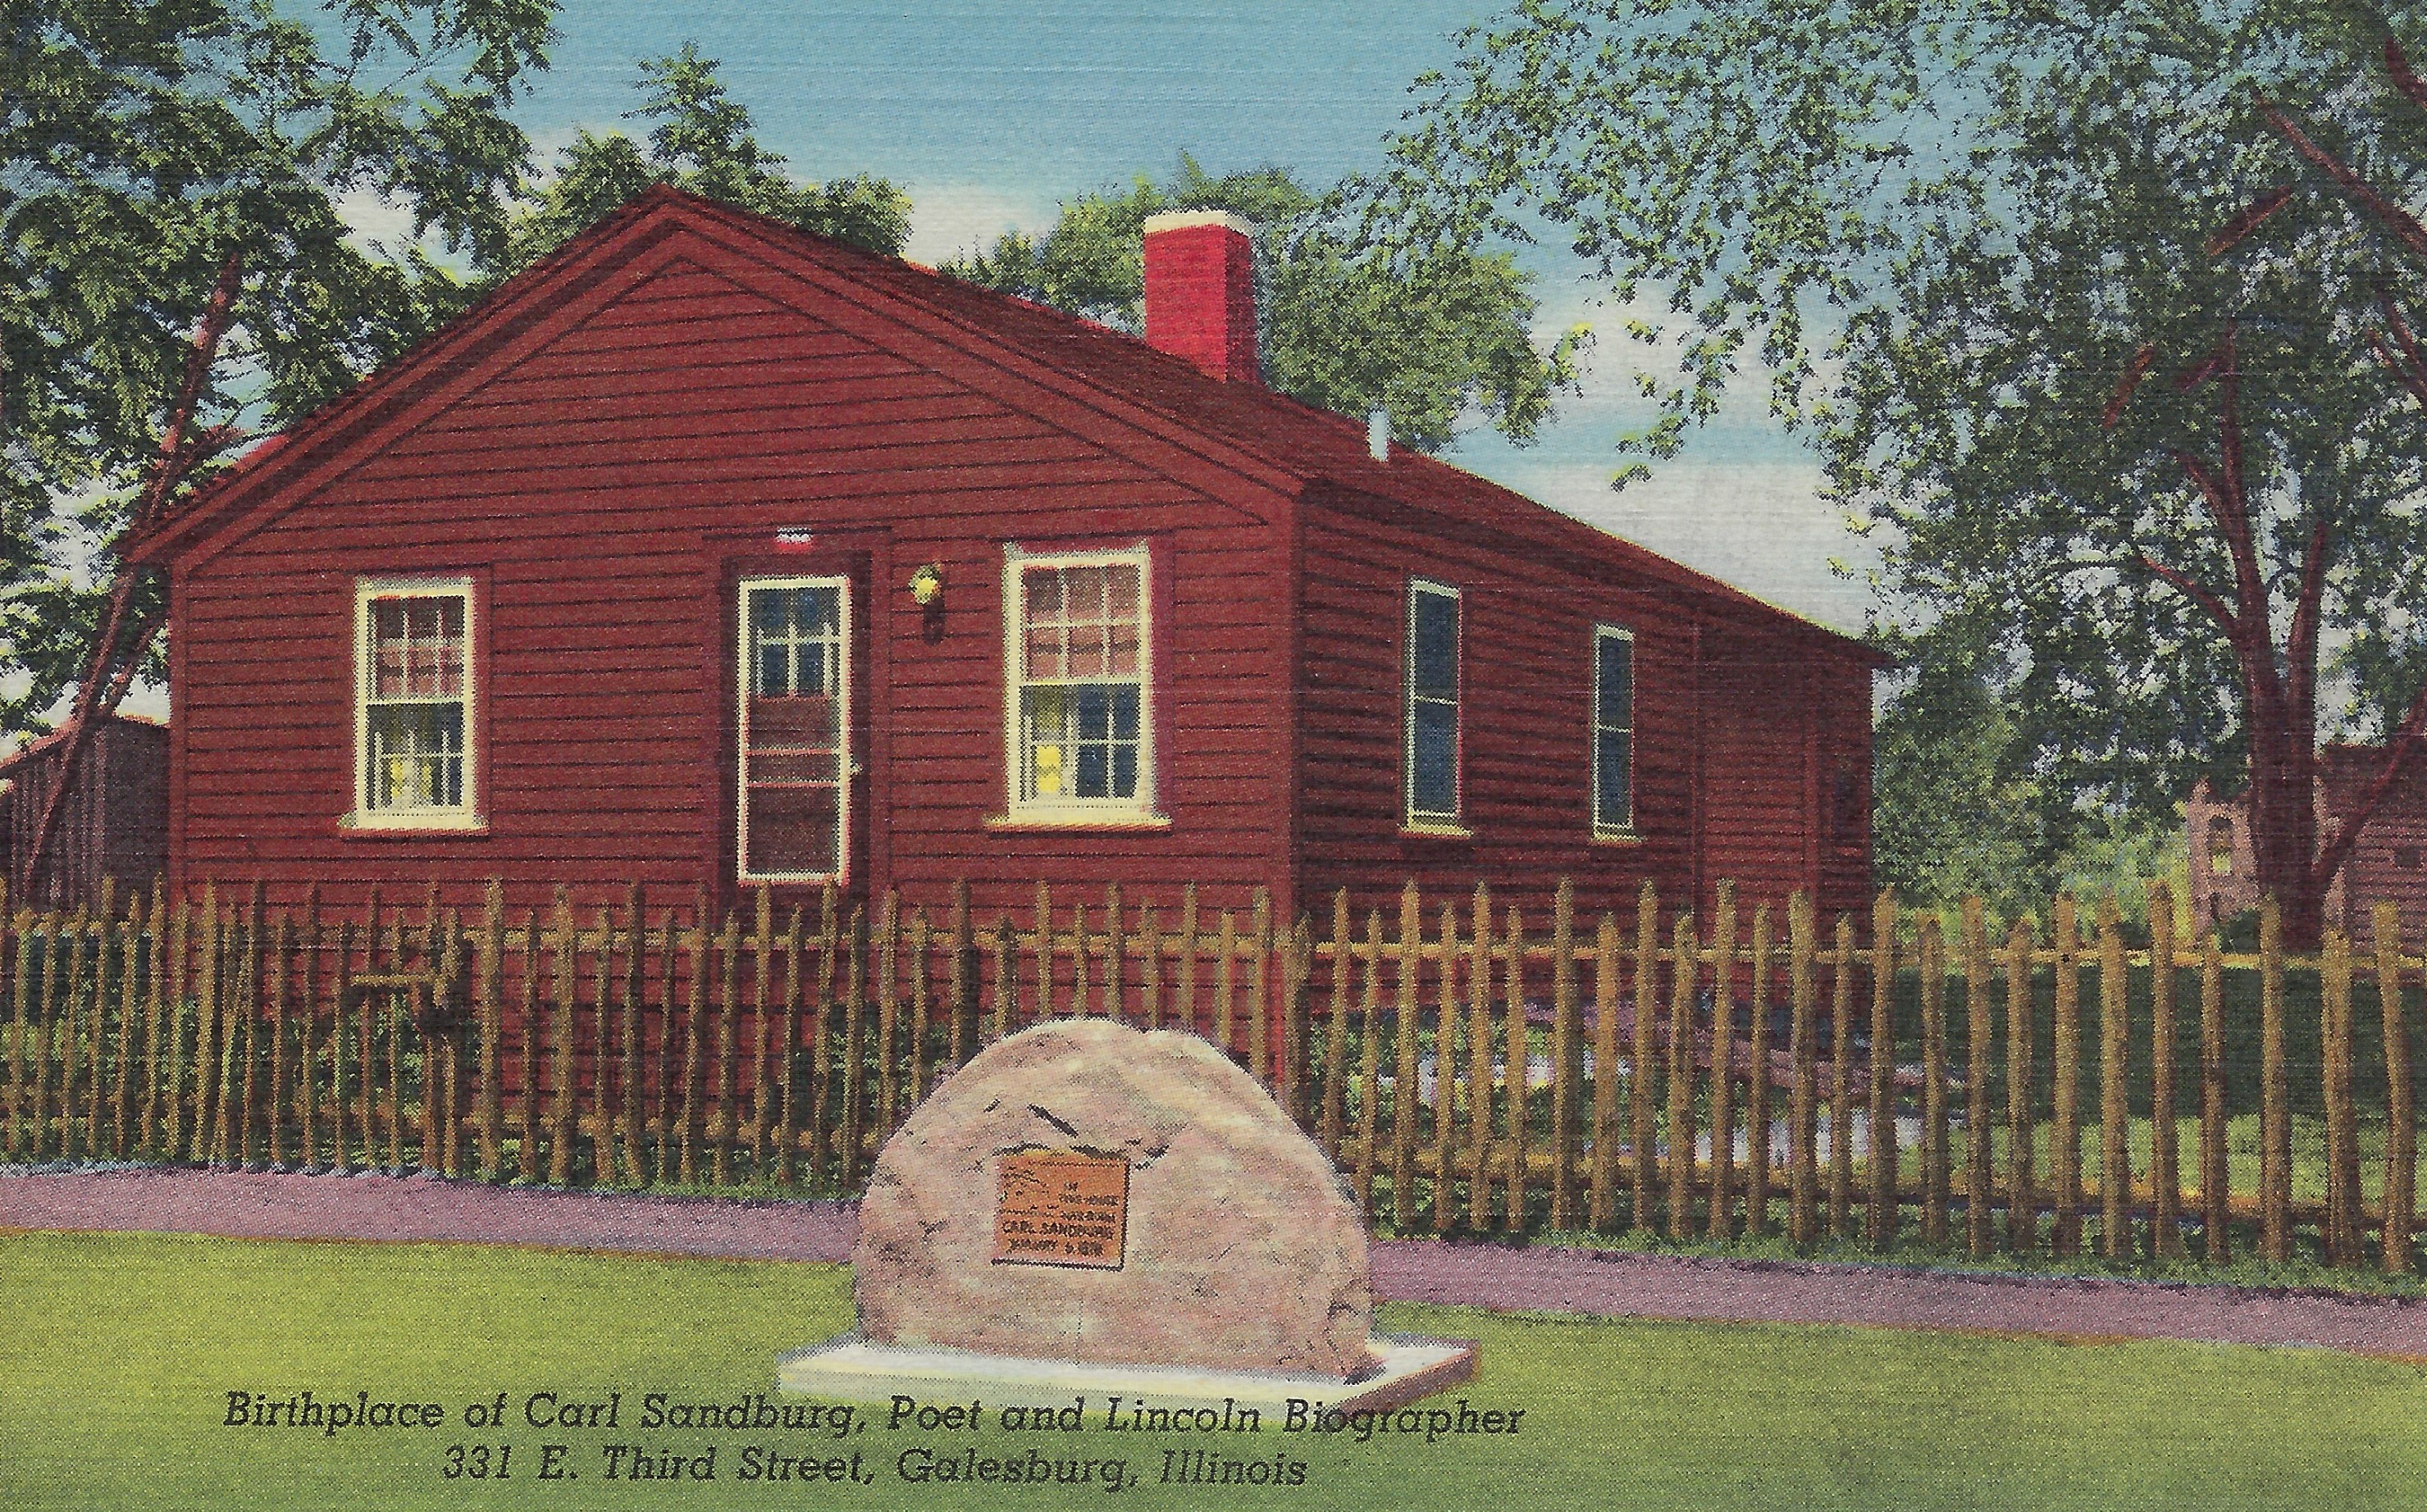 Carl Sandburg Birthplace Cottage, ca 1950, shortly after acquisition and period refurnishing by Adda George and Juanita Bednar.